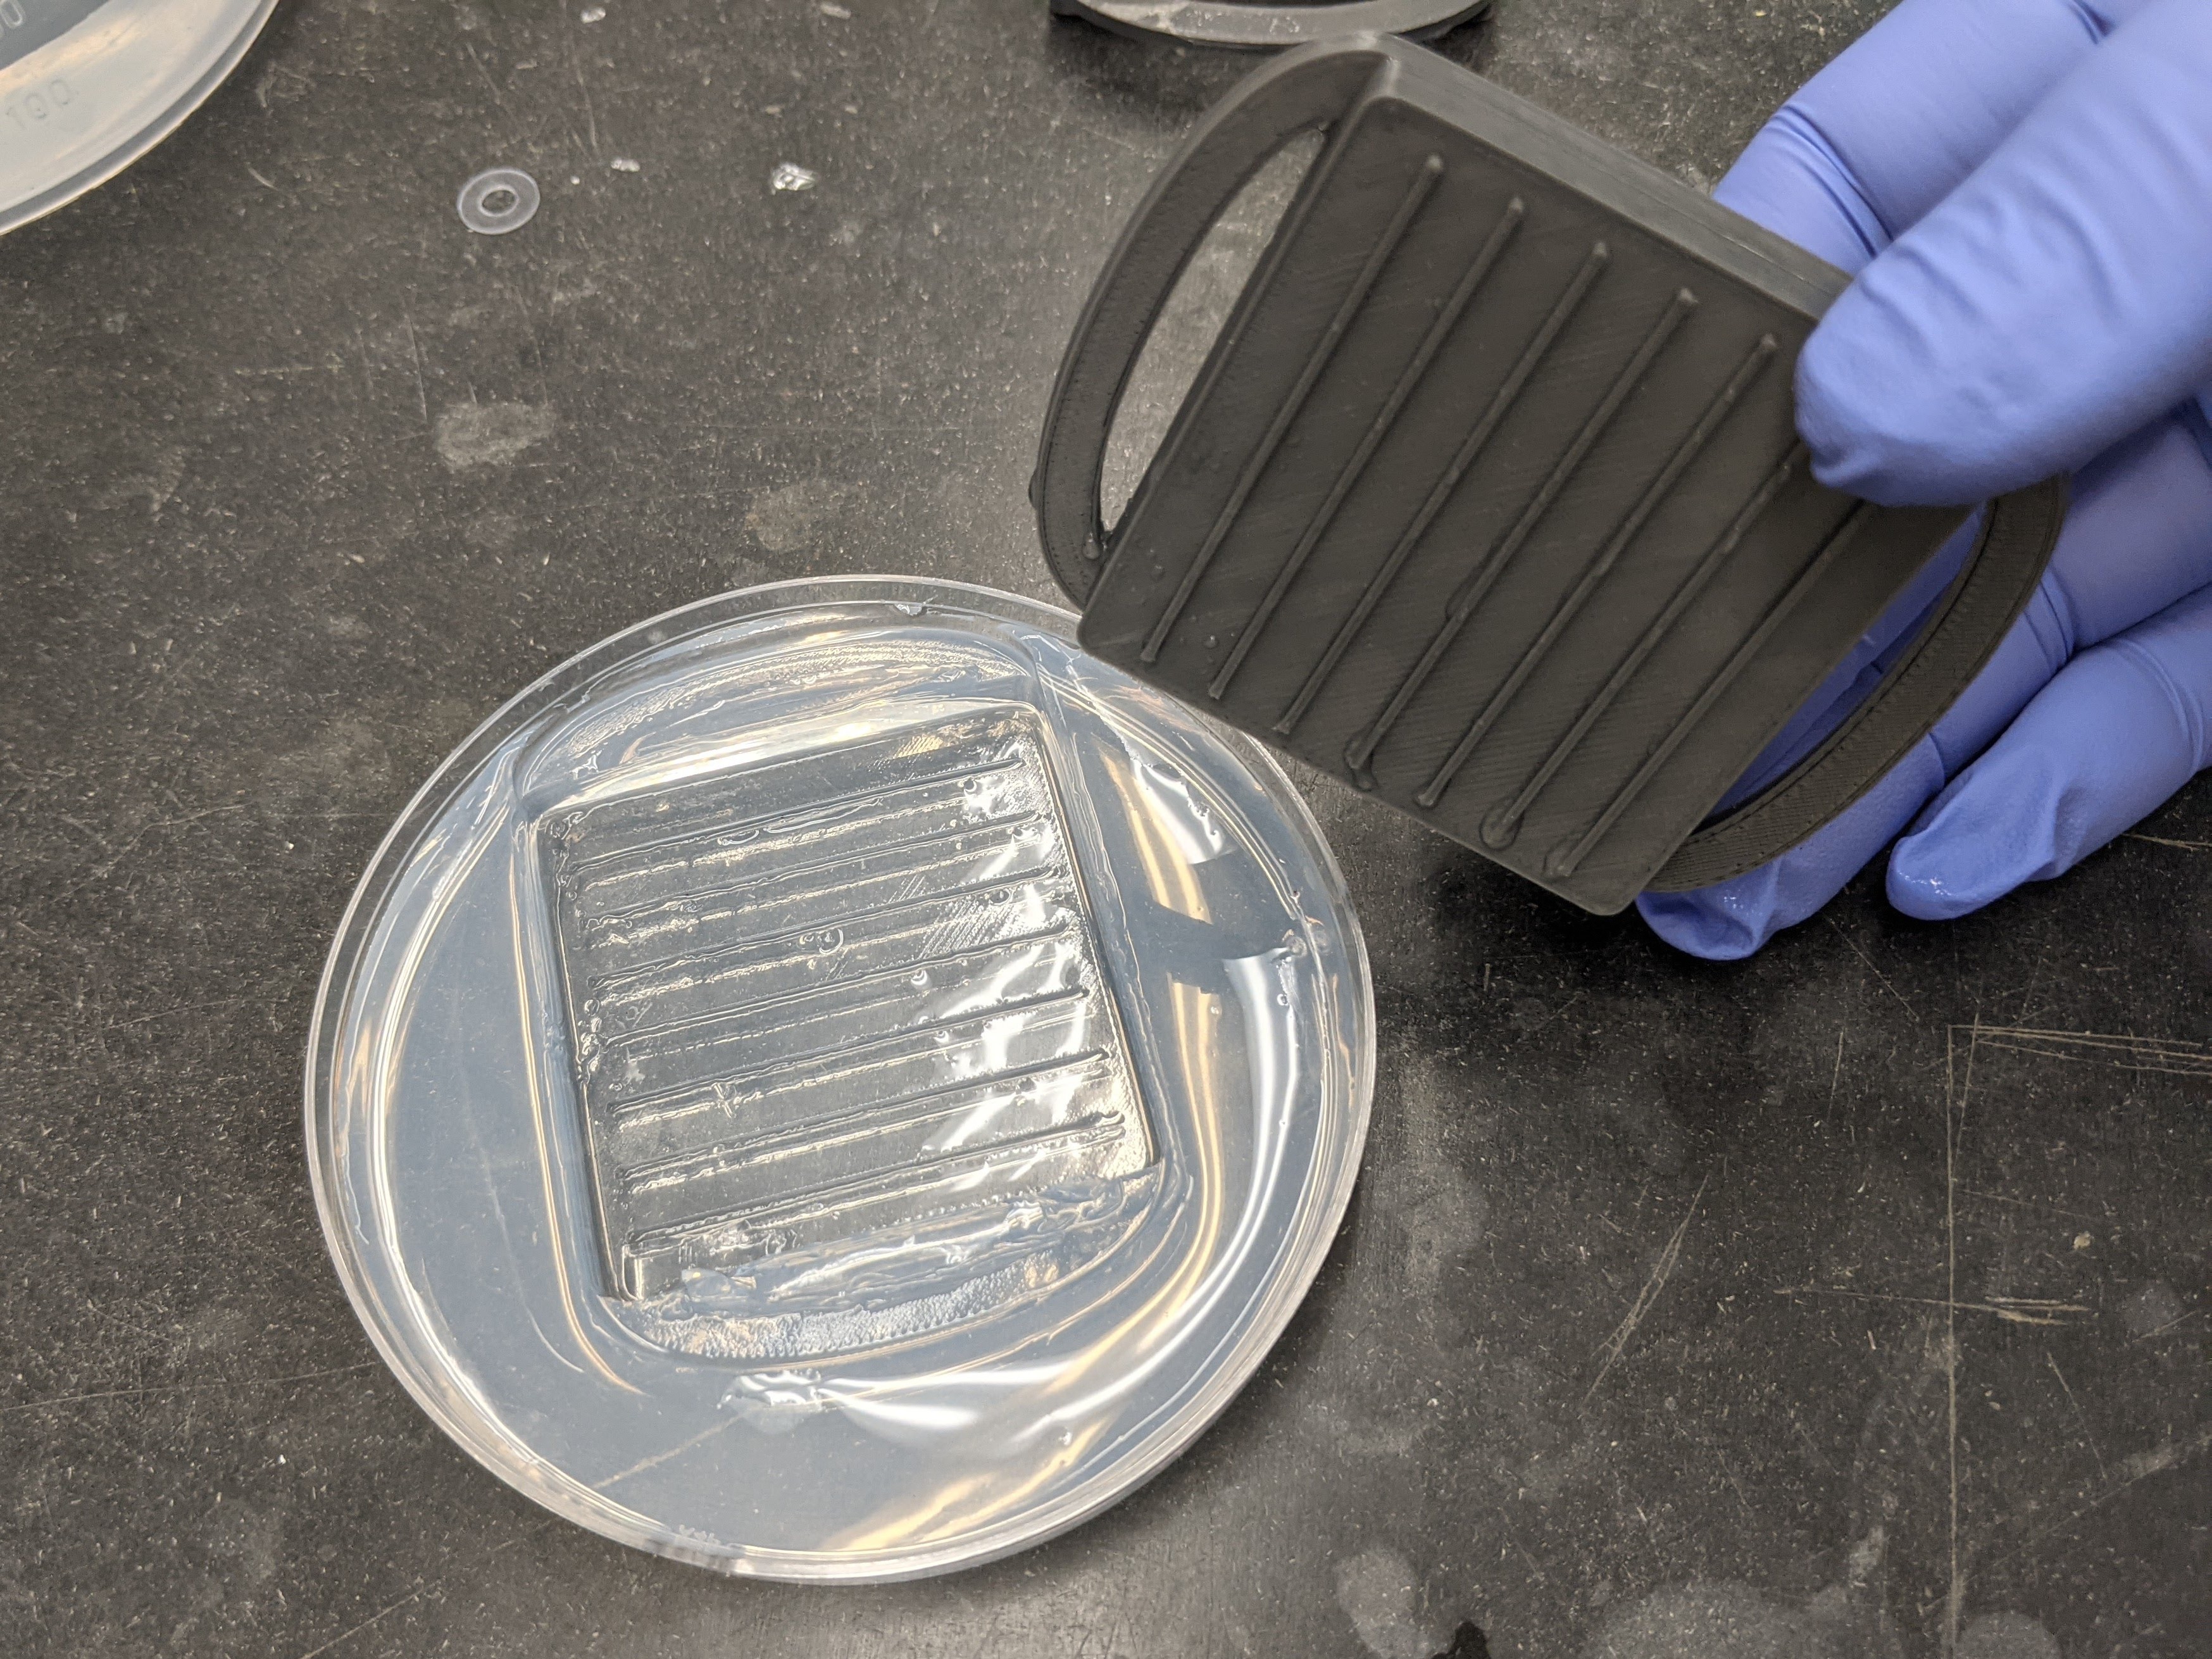 The mold can be repetitively used to imprint an agarose plate